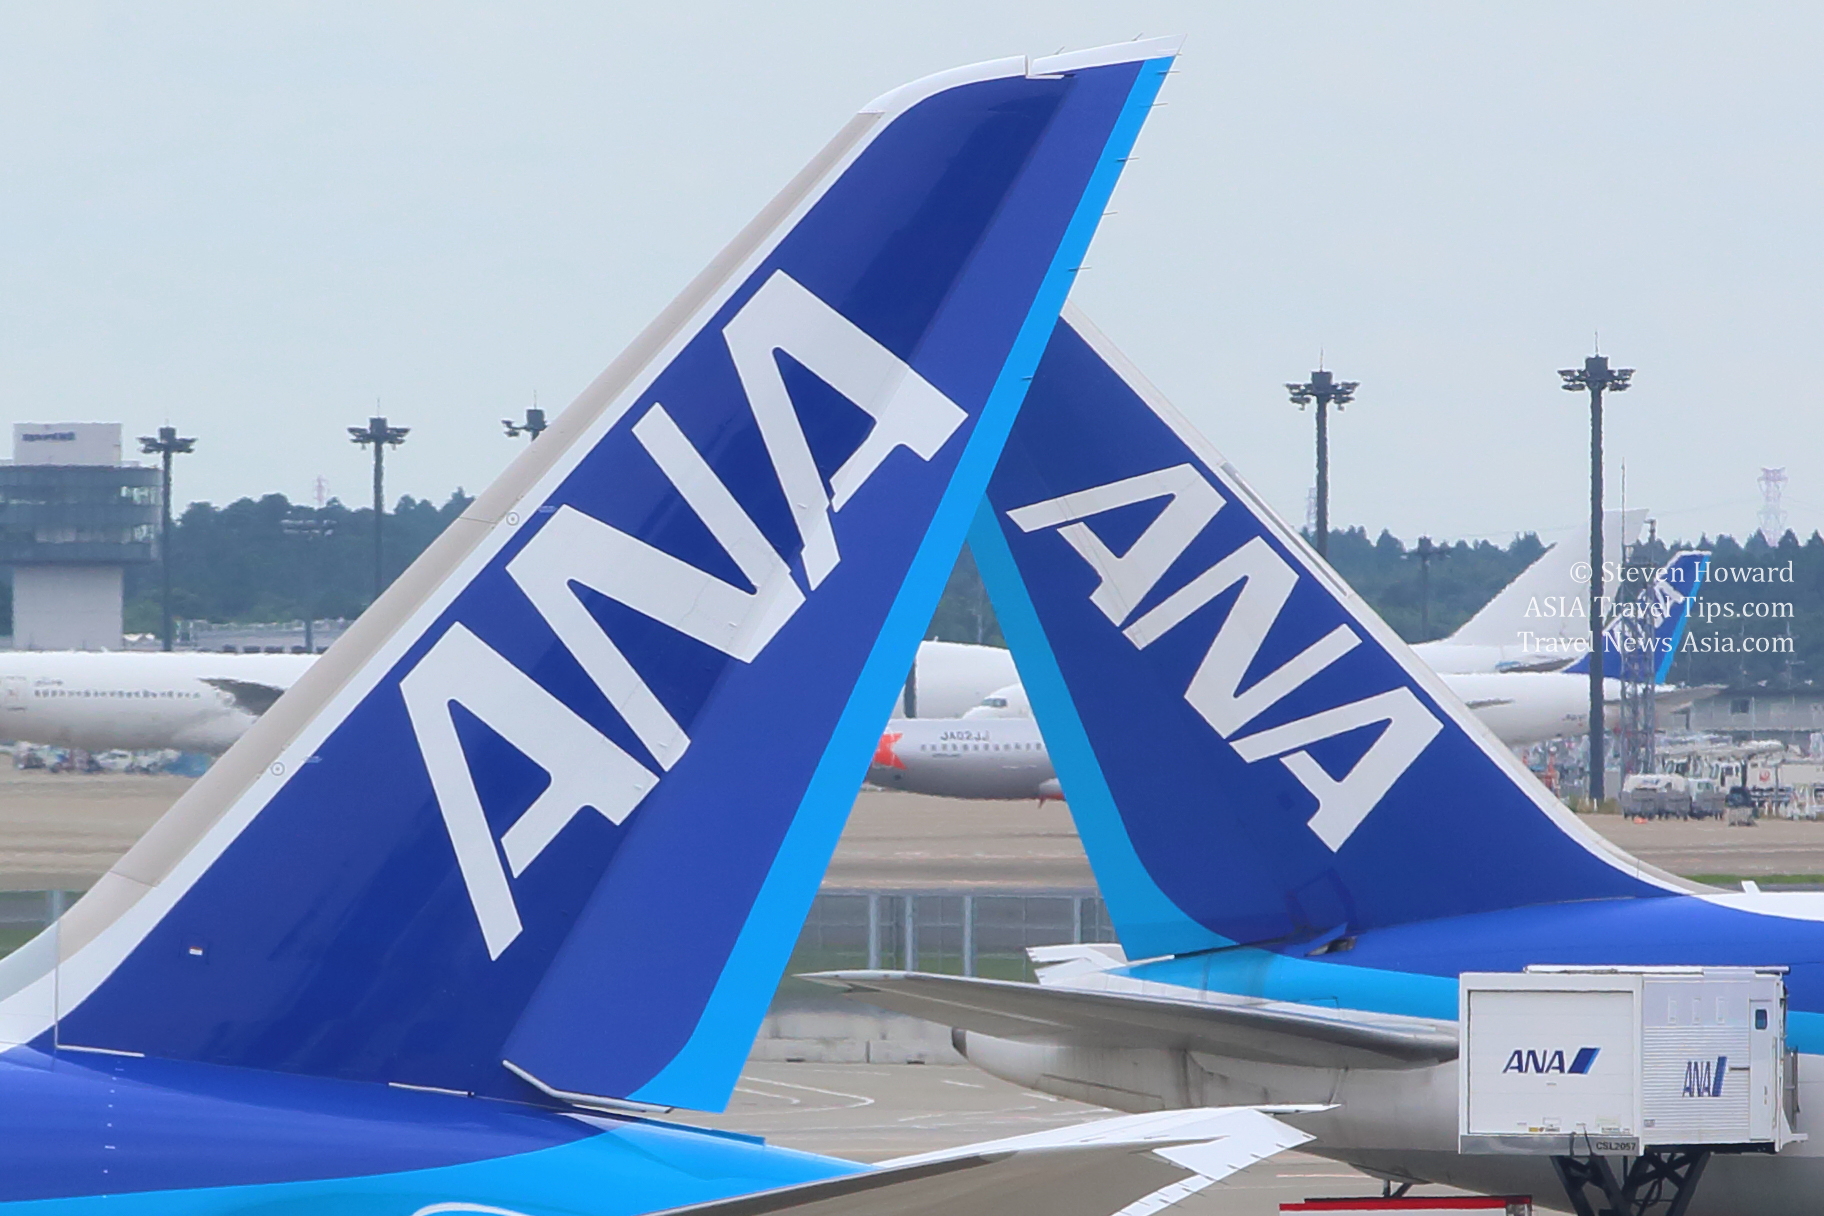 Tailfins of ANA aircraft. Picture by Steven Howard of TravelNewsAsia.com Click to enlarge.